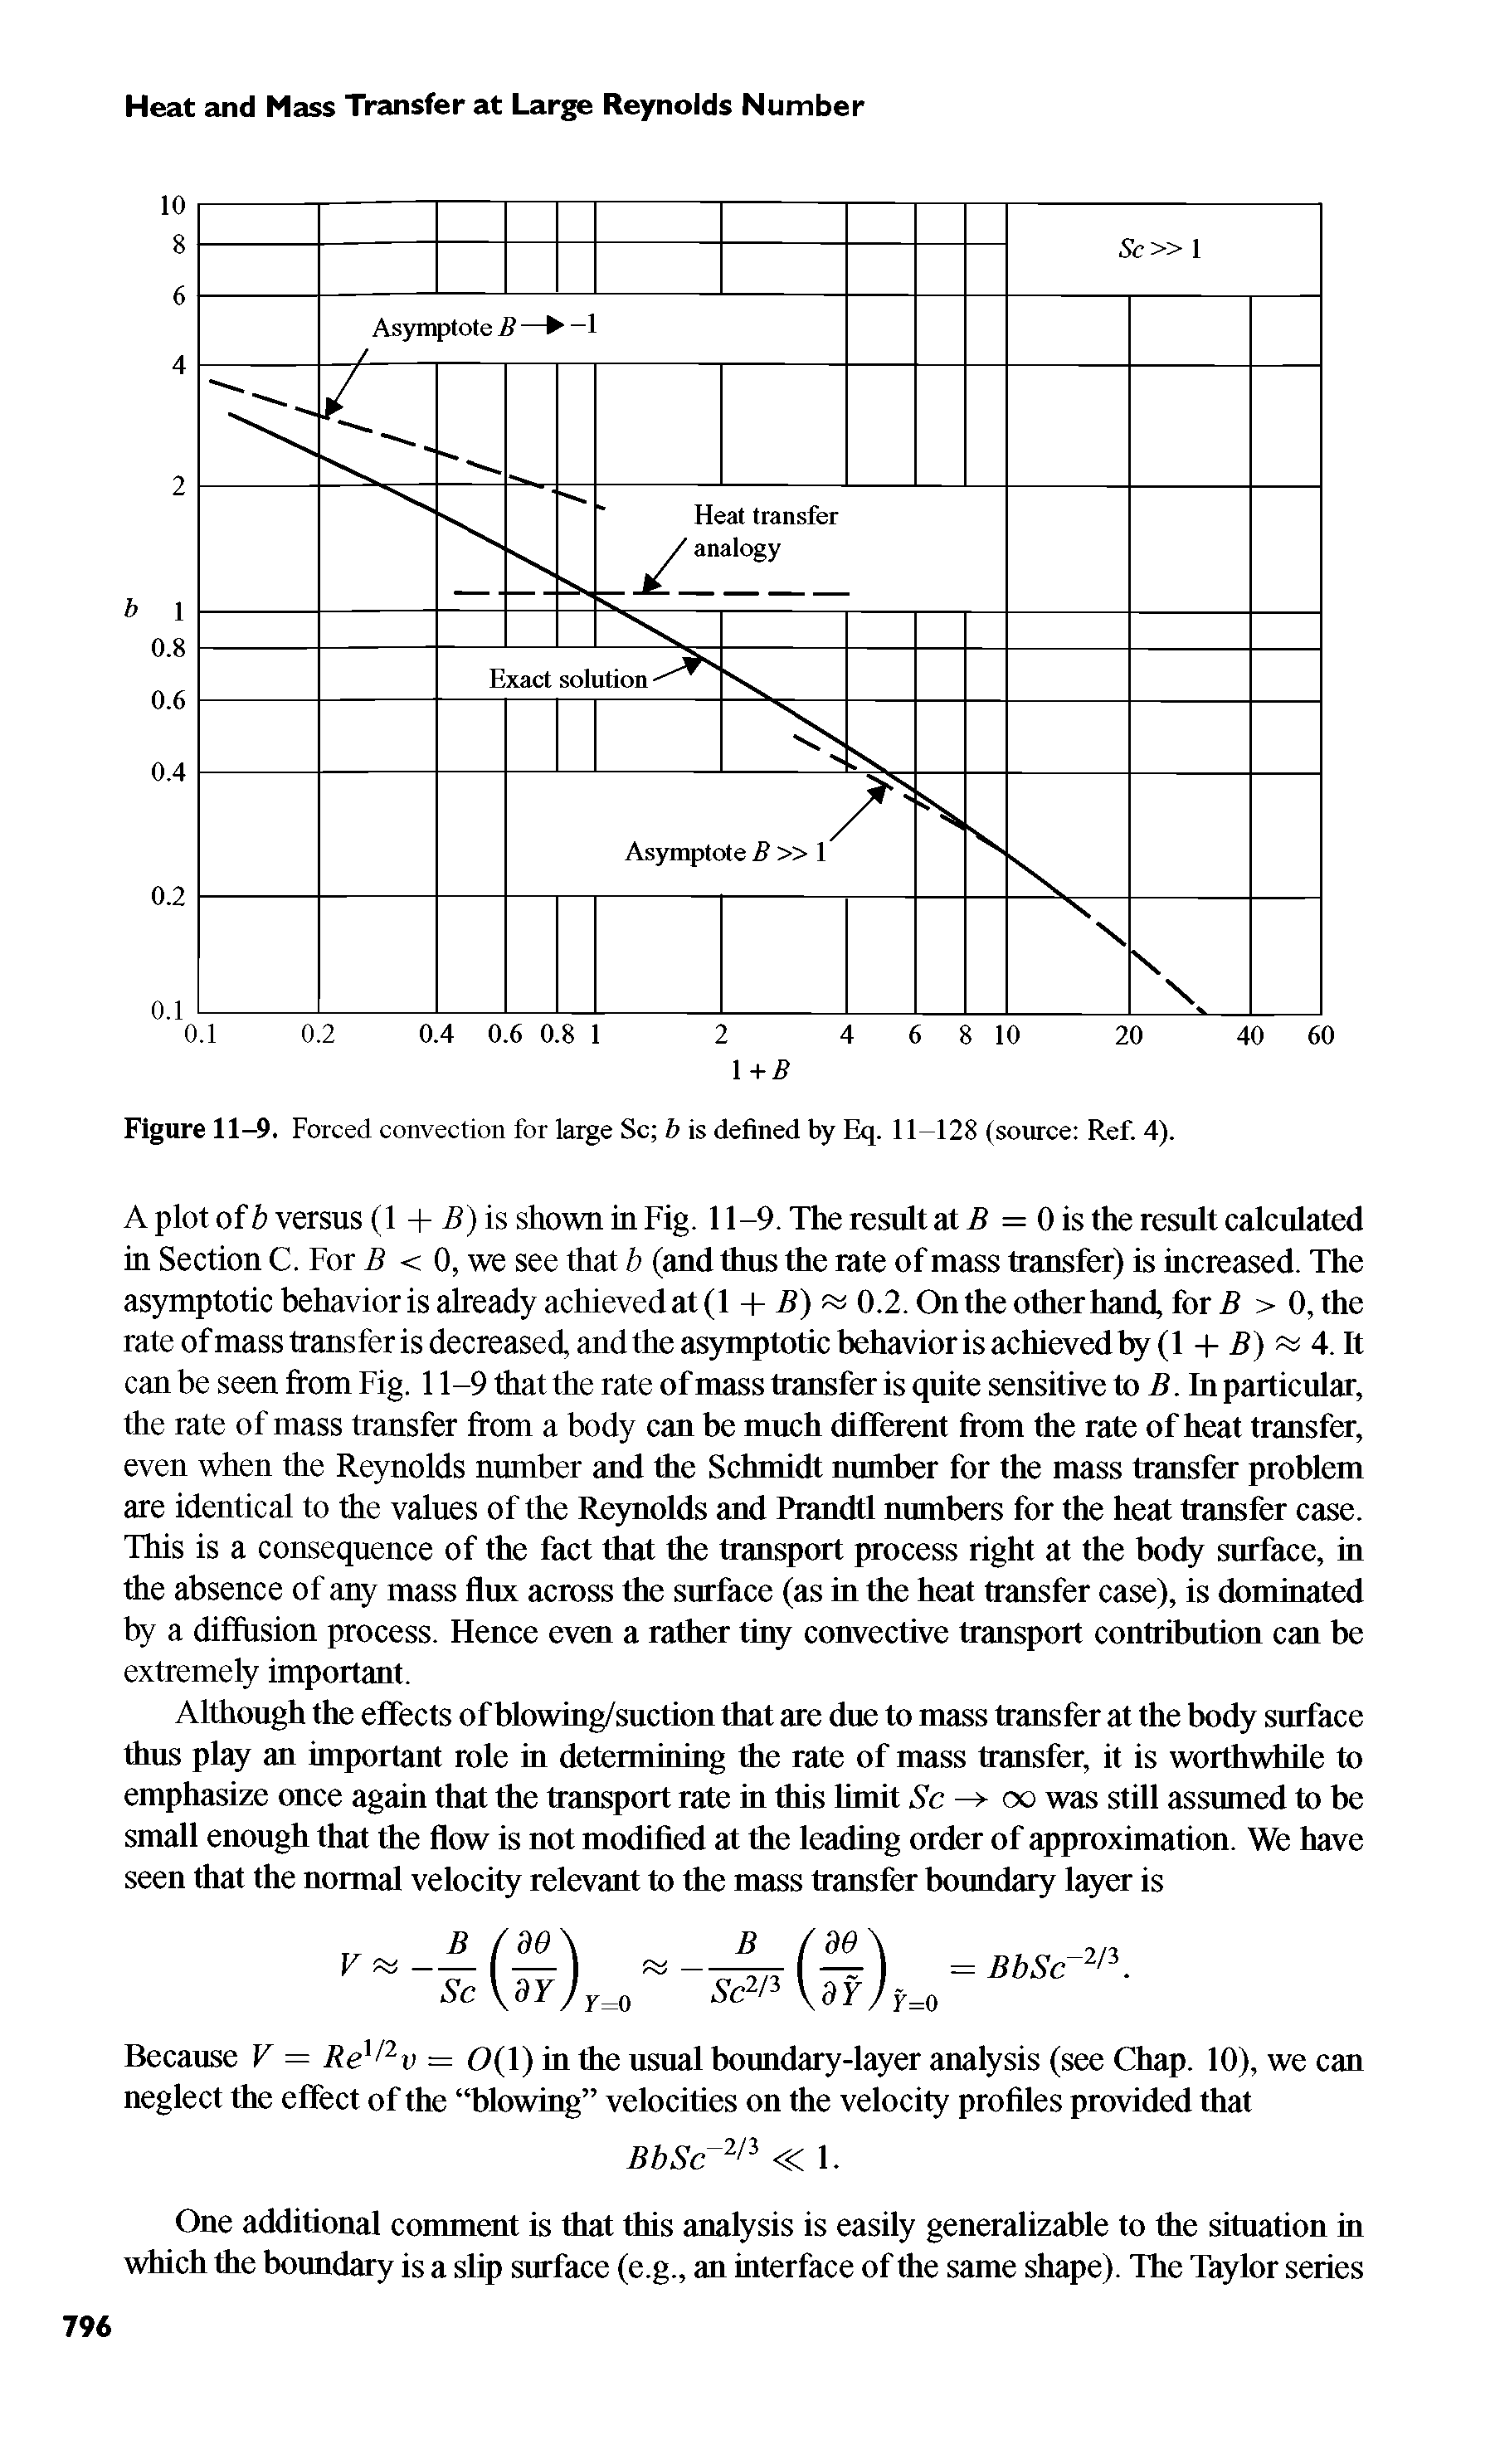 Figure 11-9. Forced convection for large Sc b is defined by Eq. 11-128 (source Ref. 4).